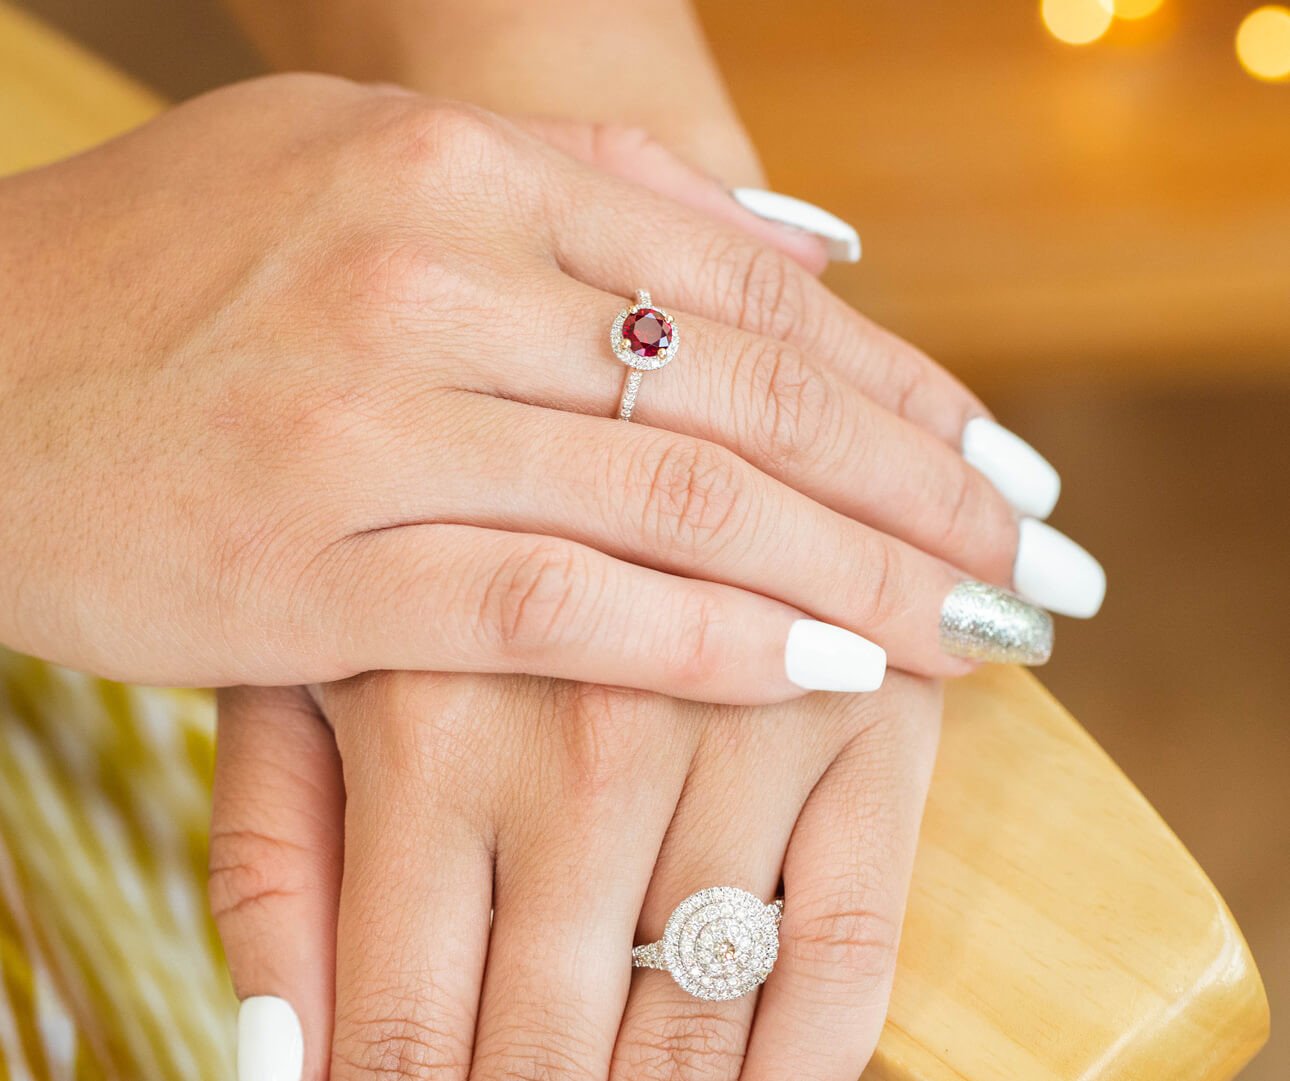 How Should A Ring Fit: Loose Rings, Tight Rings and Size 